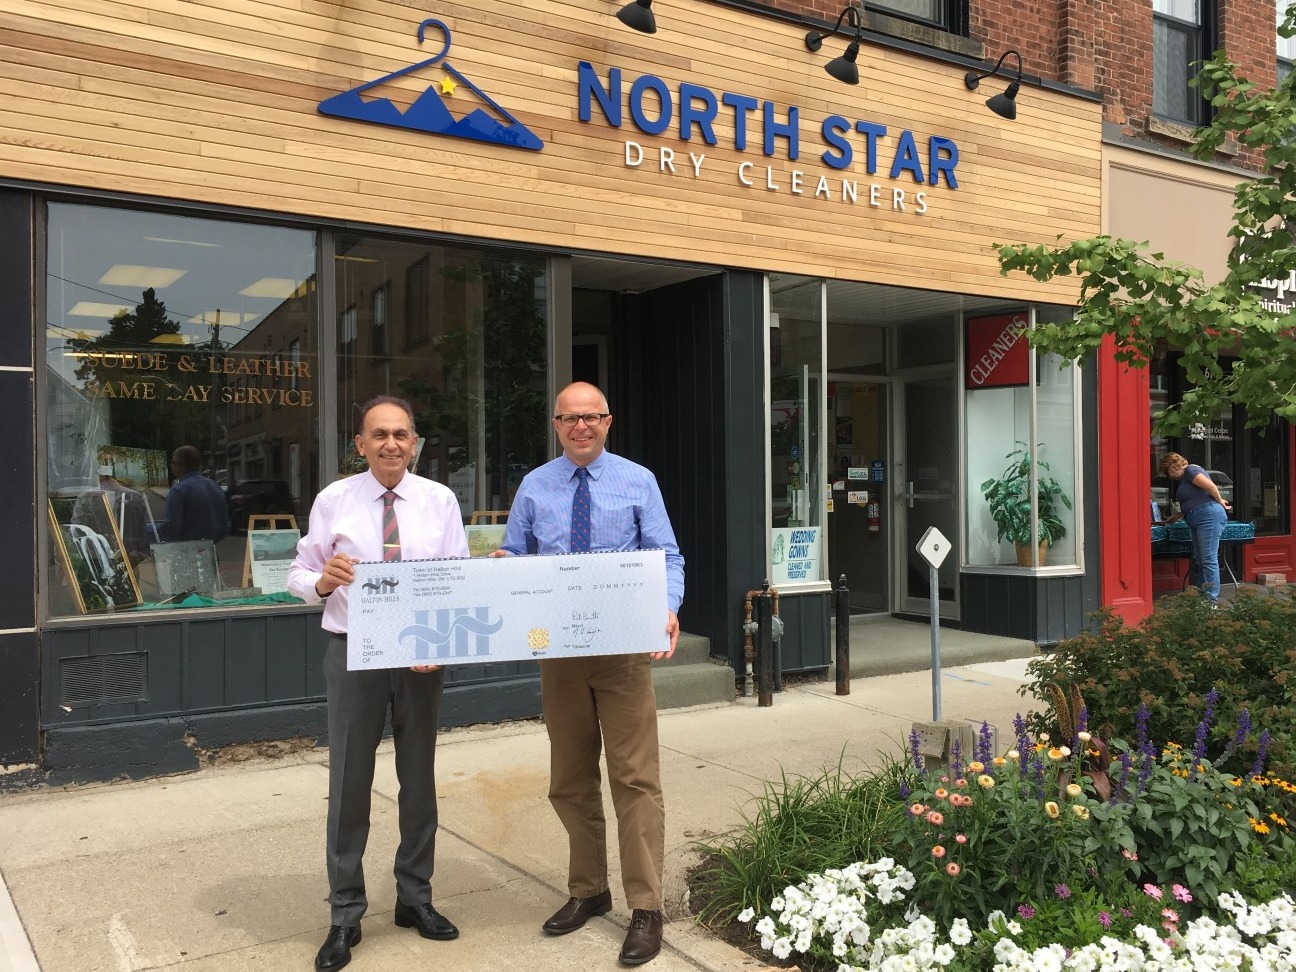 Cheque presentation in front of North Star Dry Cleaners